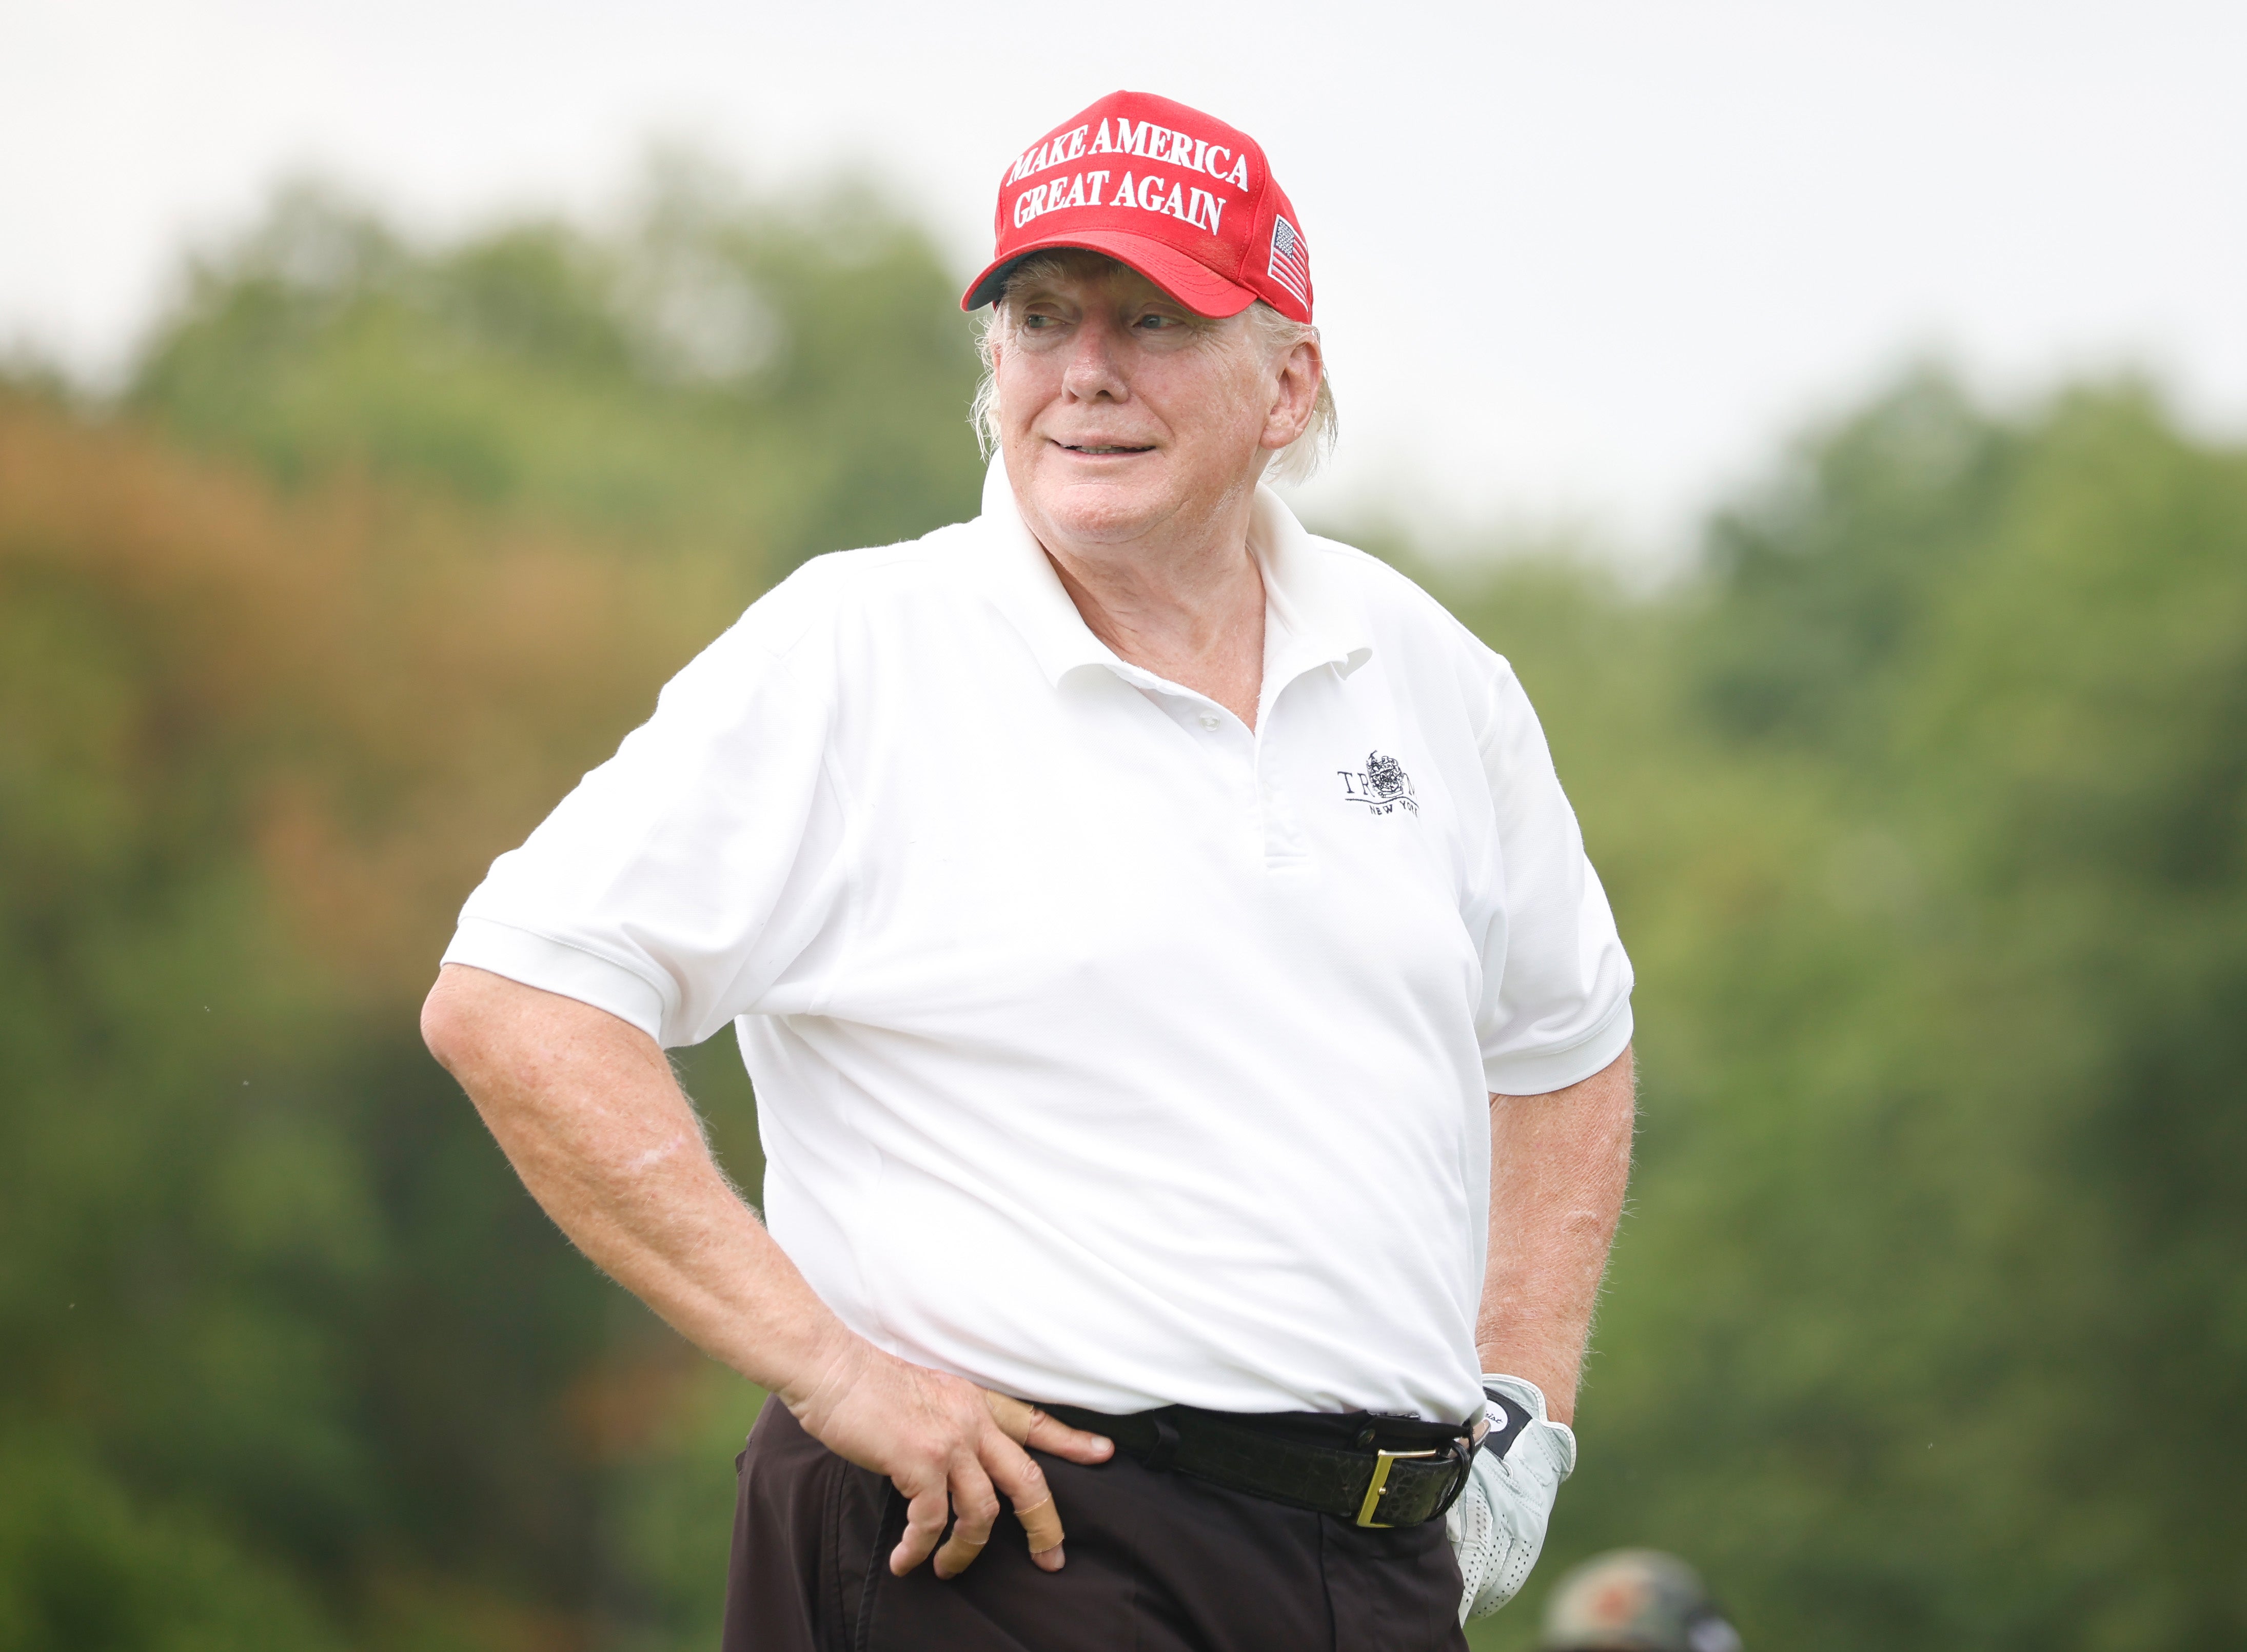 Trump striking a pose on the golf course